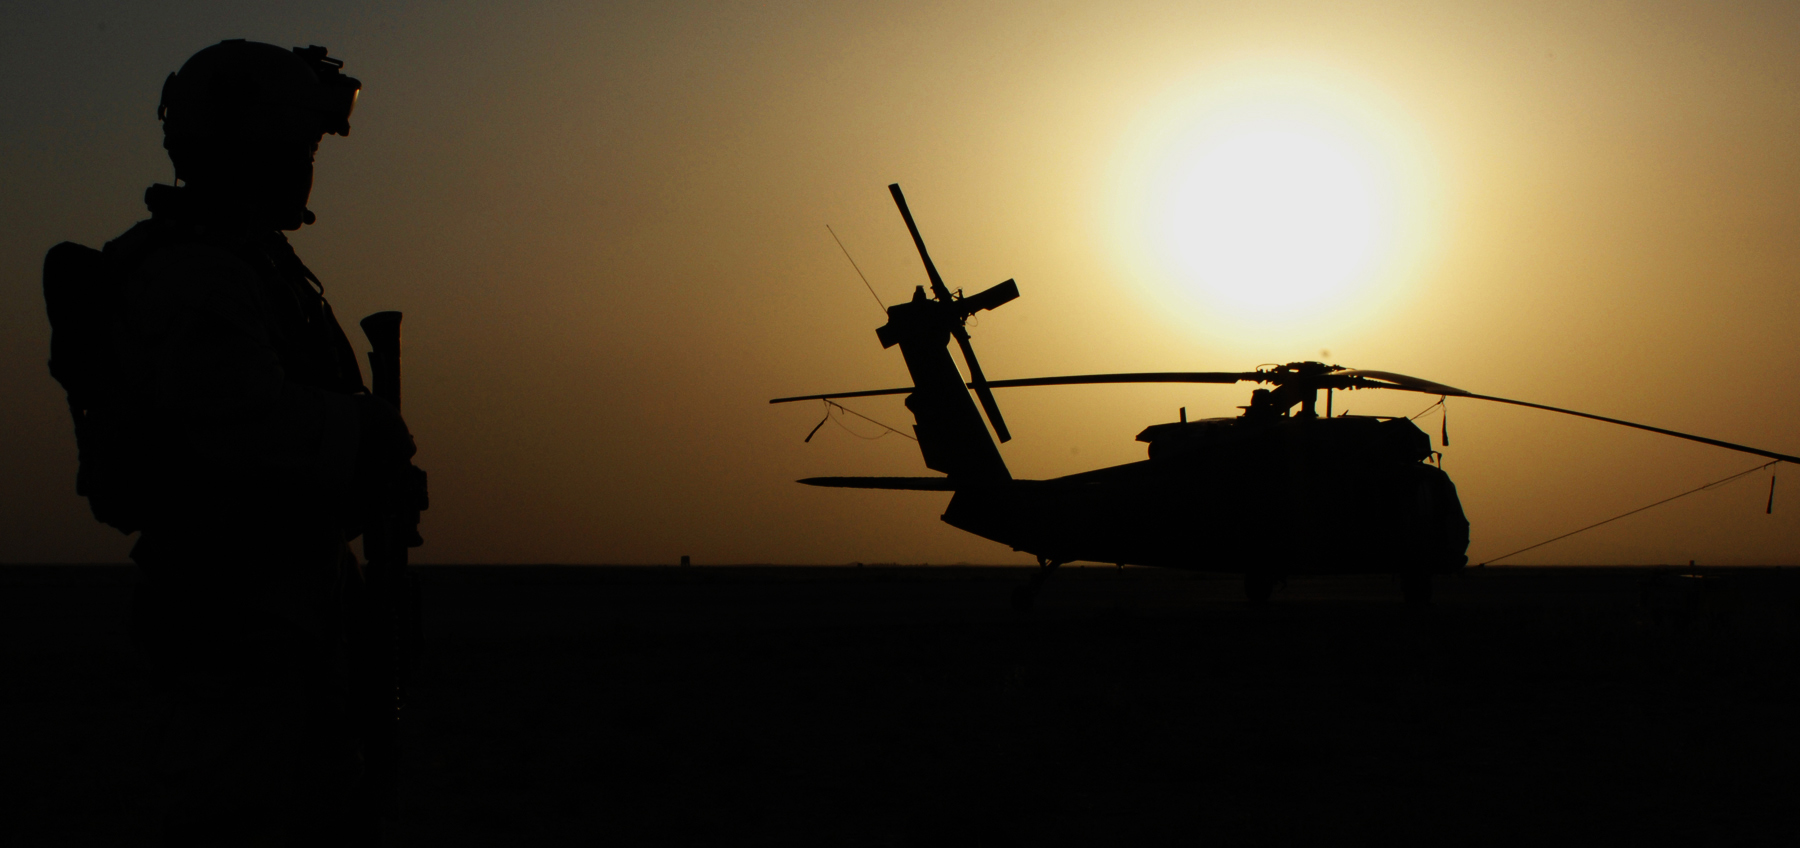 military helicopters, military, sikorsky uh 60 black hawk iphone wallpaper